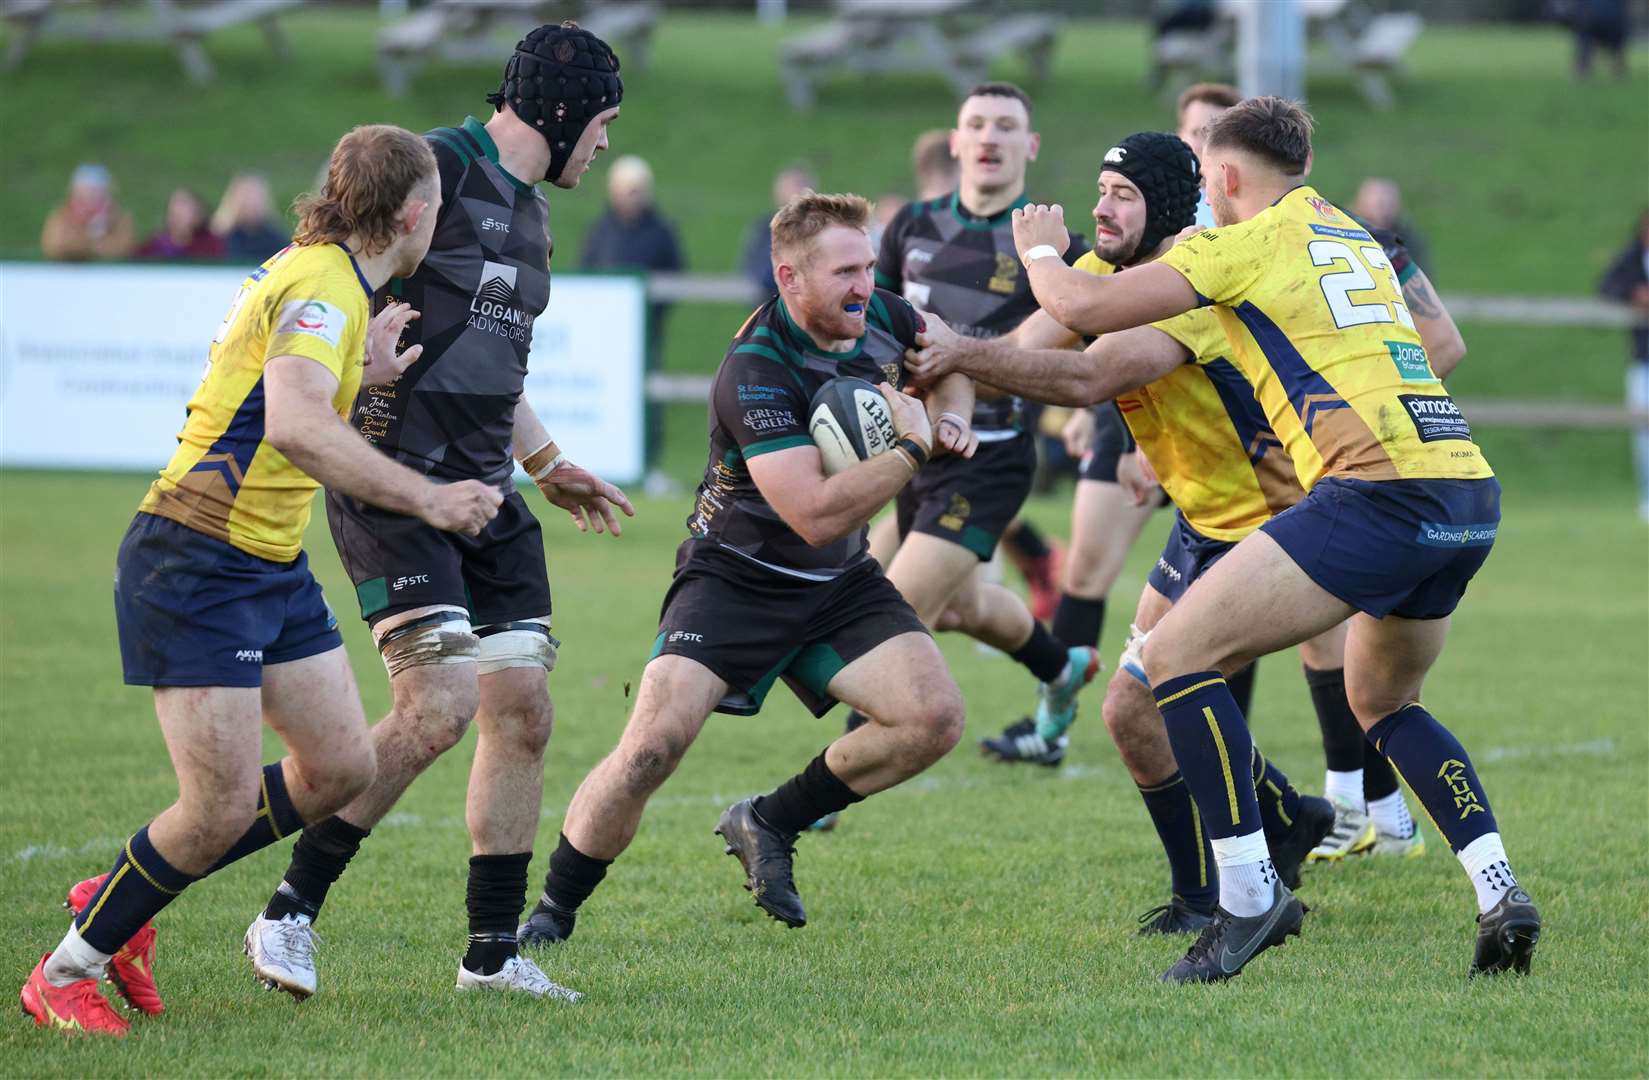 Ben Leng has his shirt grabbed as he looks to gain ground on a run forward Picture: Richard Marsham